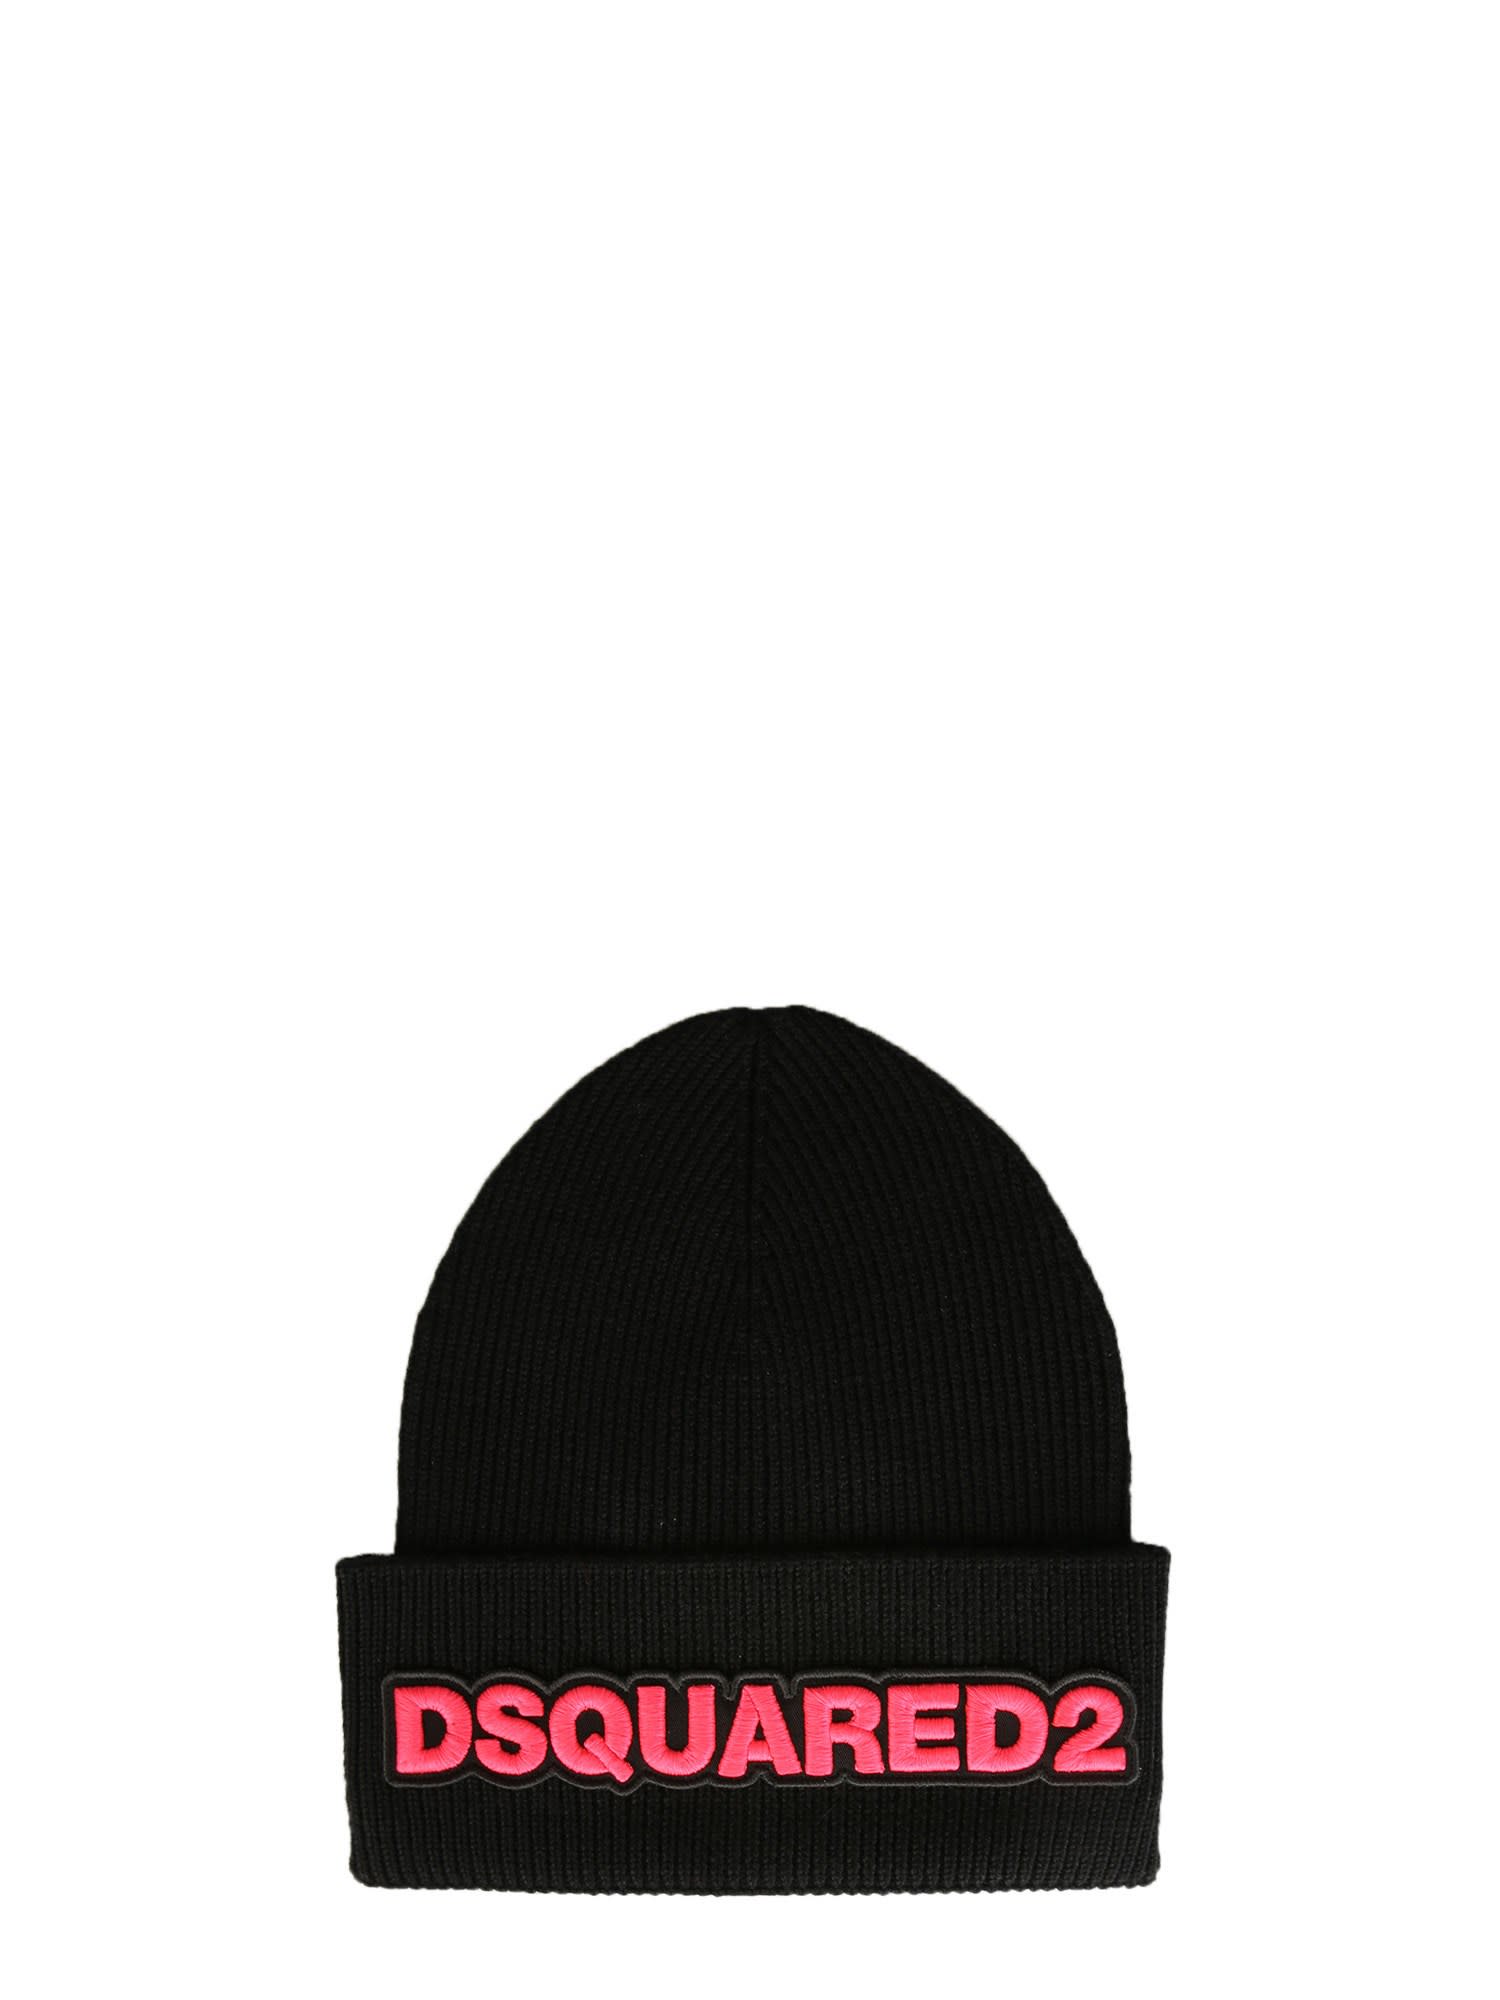 Dsquared2 Knitted Hat